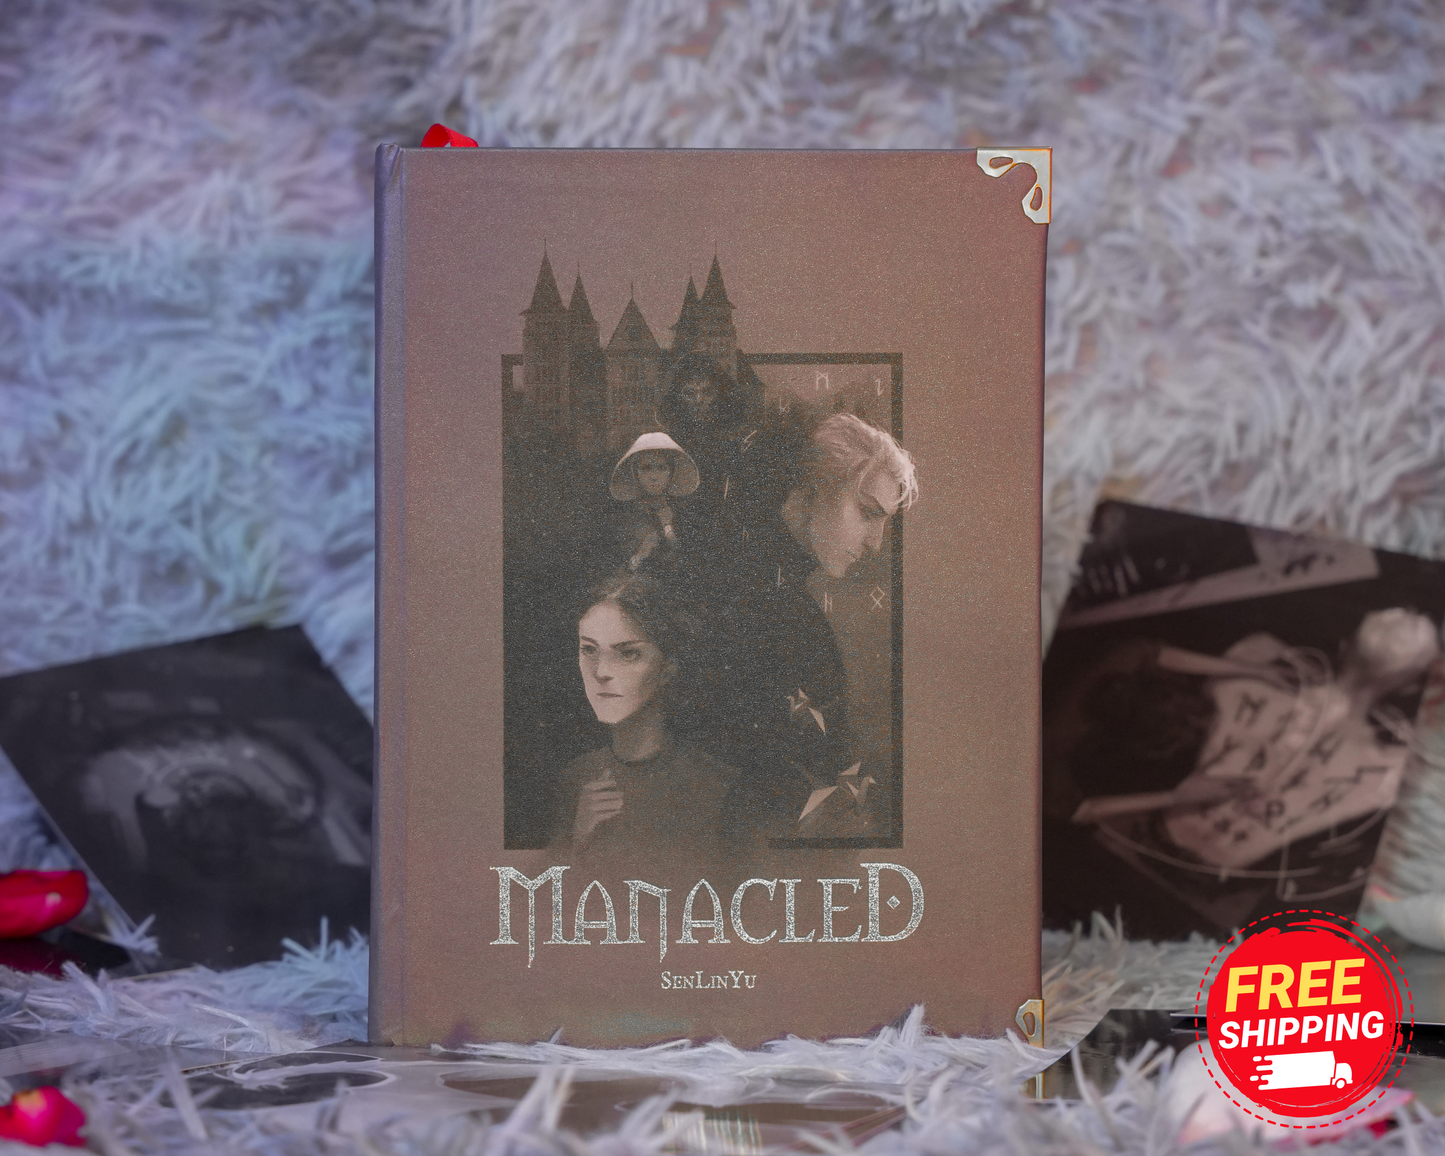 Manacled Fanfiction Book - Unique Compiled Edition 📚